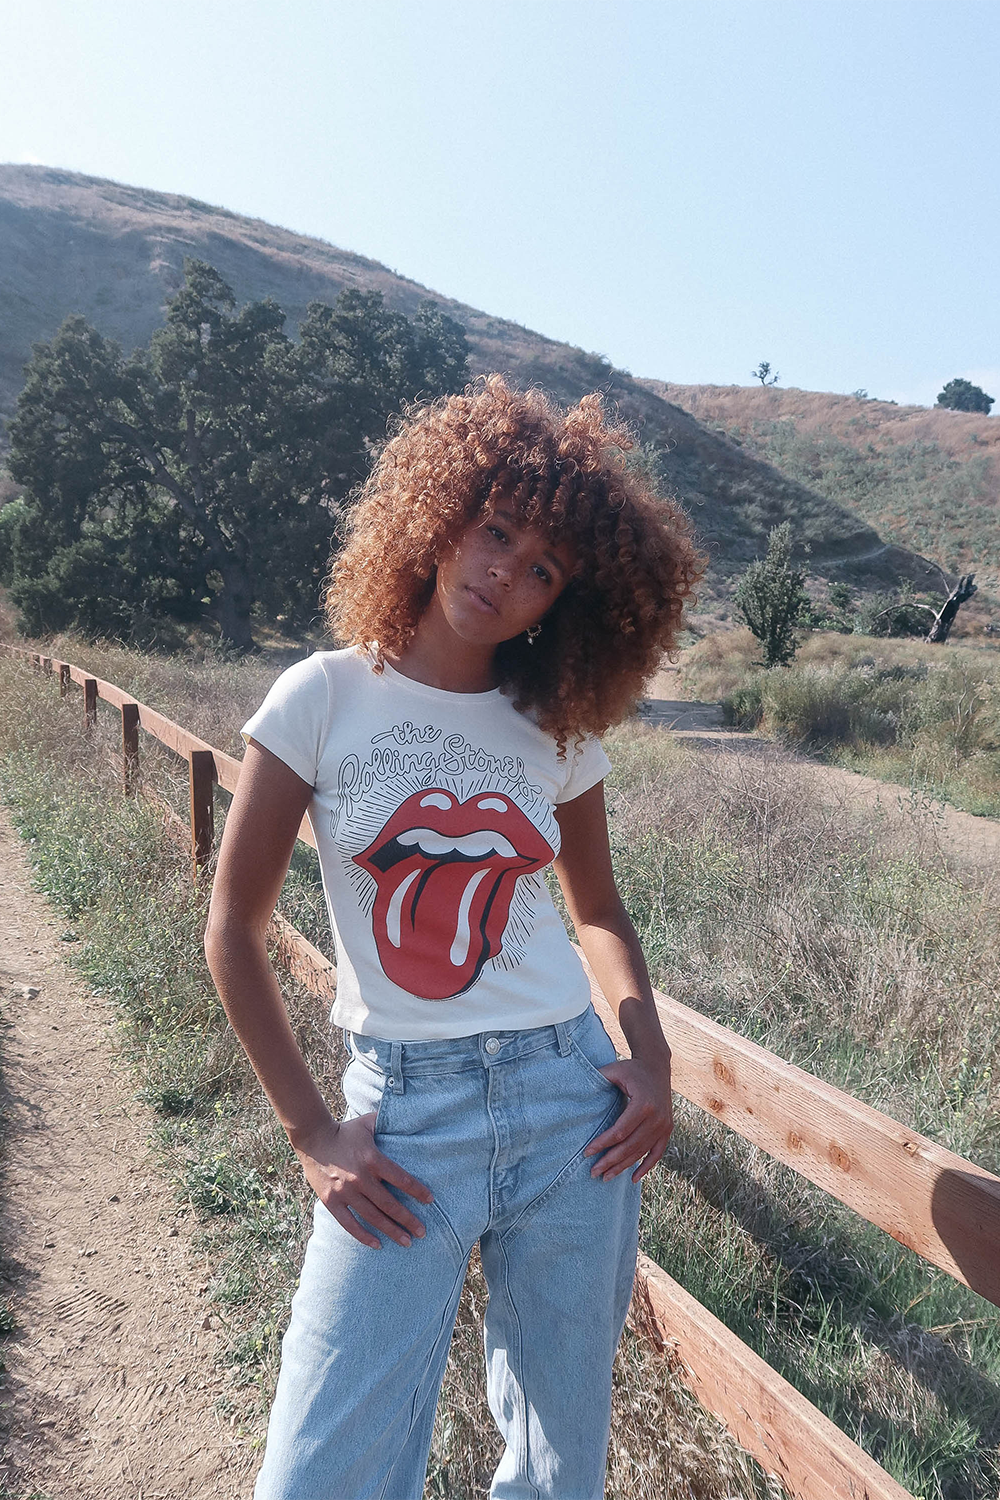 Rolling Stones Ruby Tuesday Baby Tee